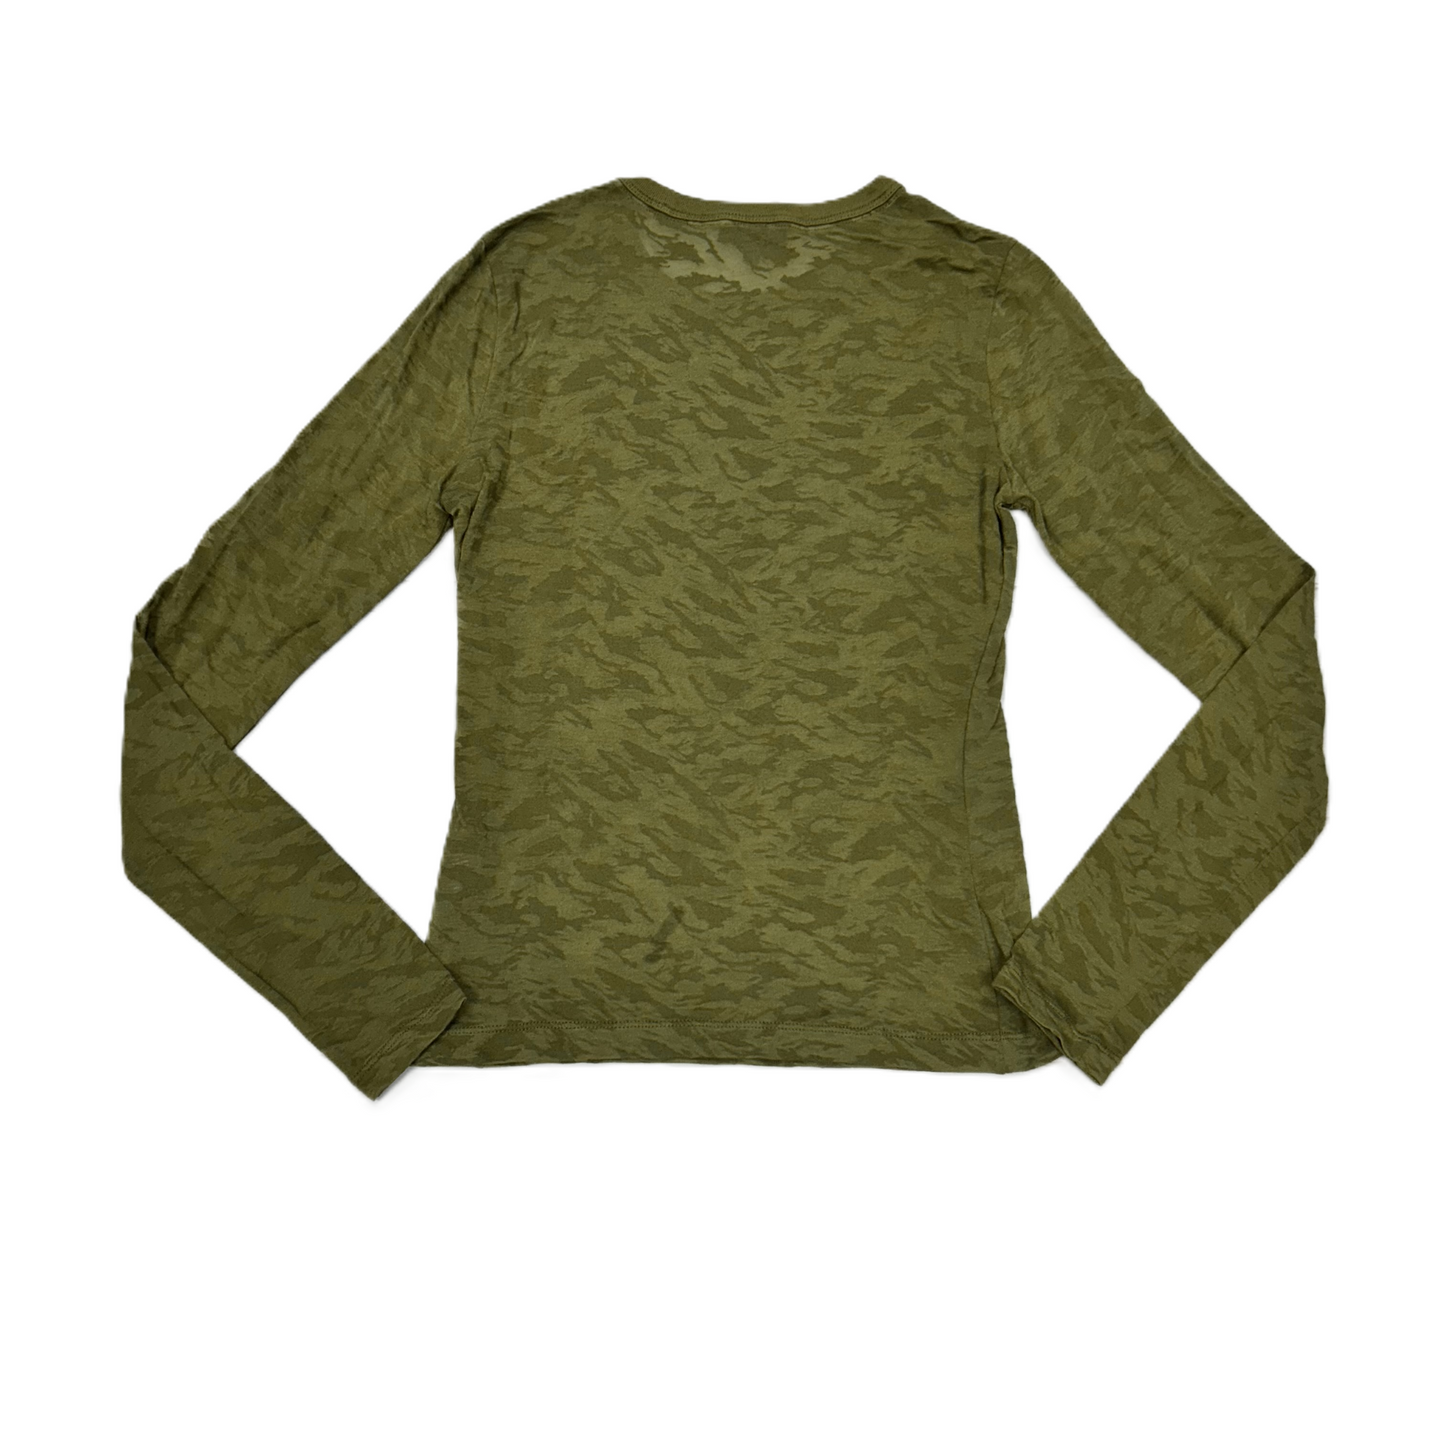 Green Top Long Sleeve Designer By Rag And Bone, Size: S